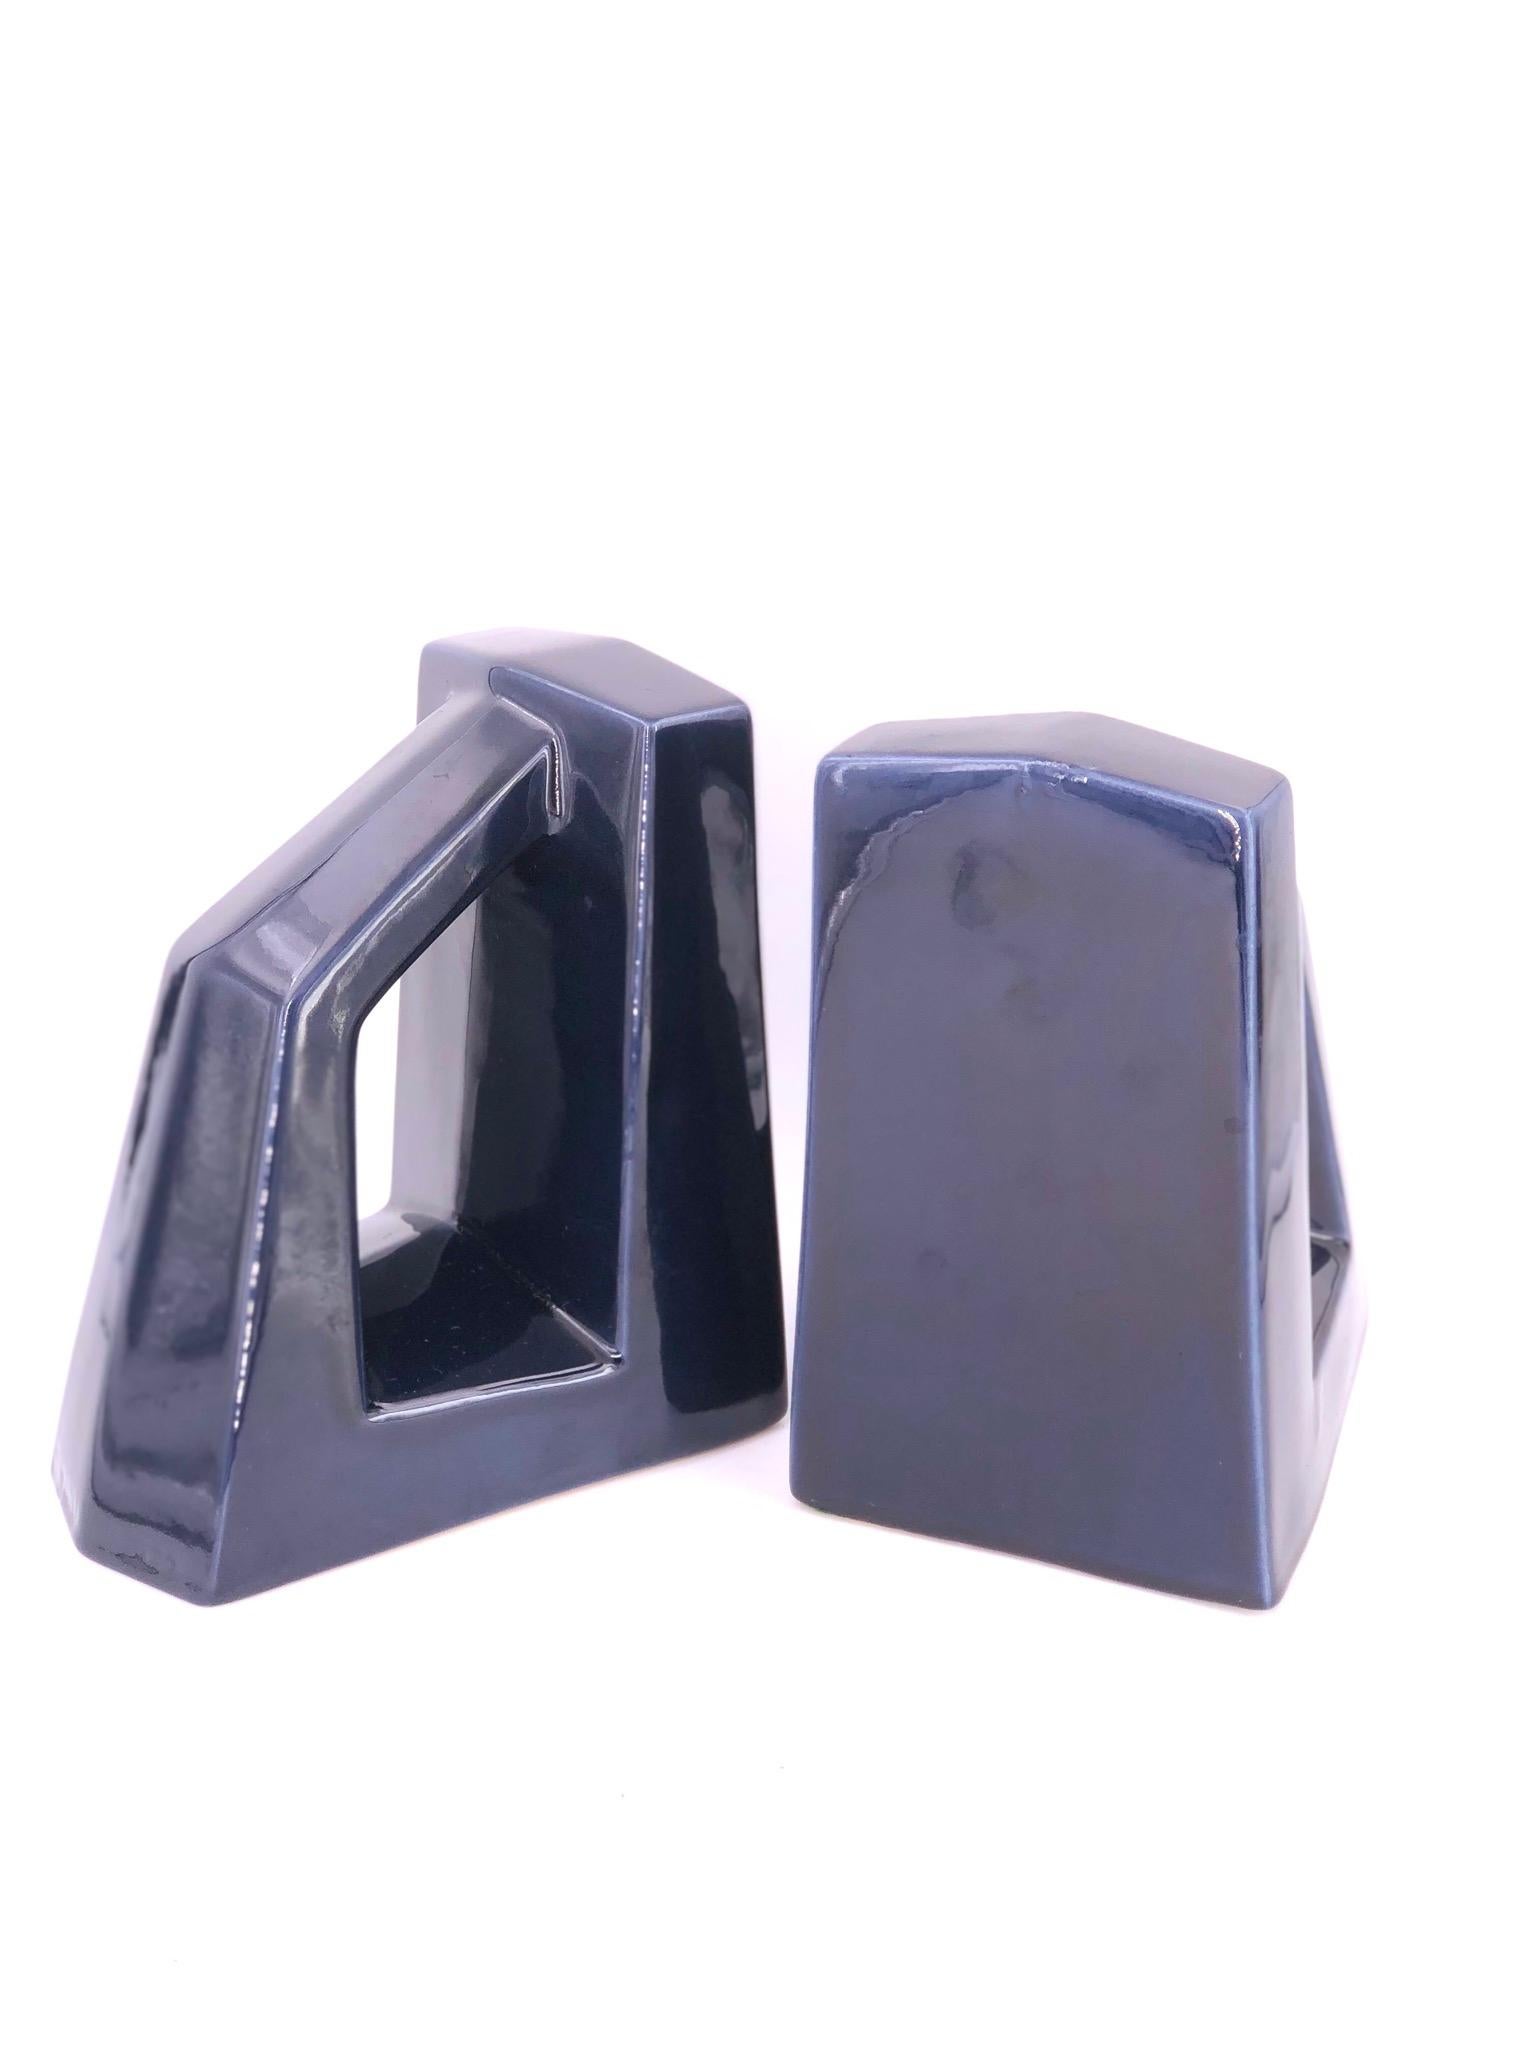 Art Deco style rare pair of ceramic bookends by Jaru circa 1960s in a navy blue glossy finish. Stamped at the bottom and retains the original label, one of the bookends presents a repair of a chip as shown in the picture. Item sold AS/IS.